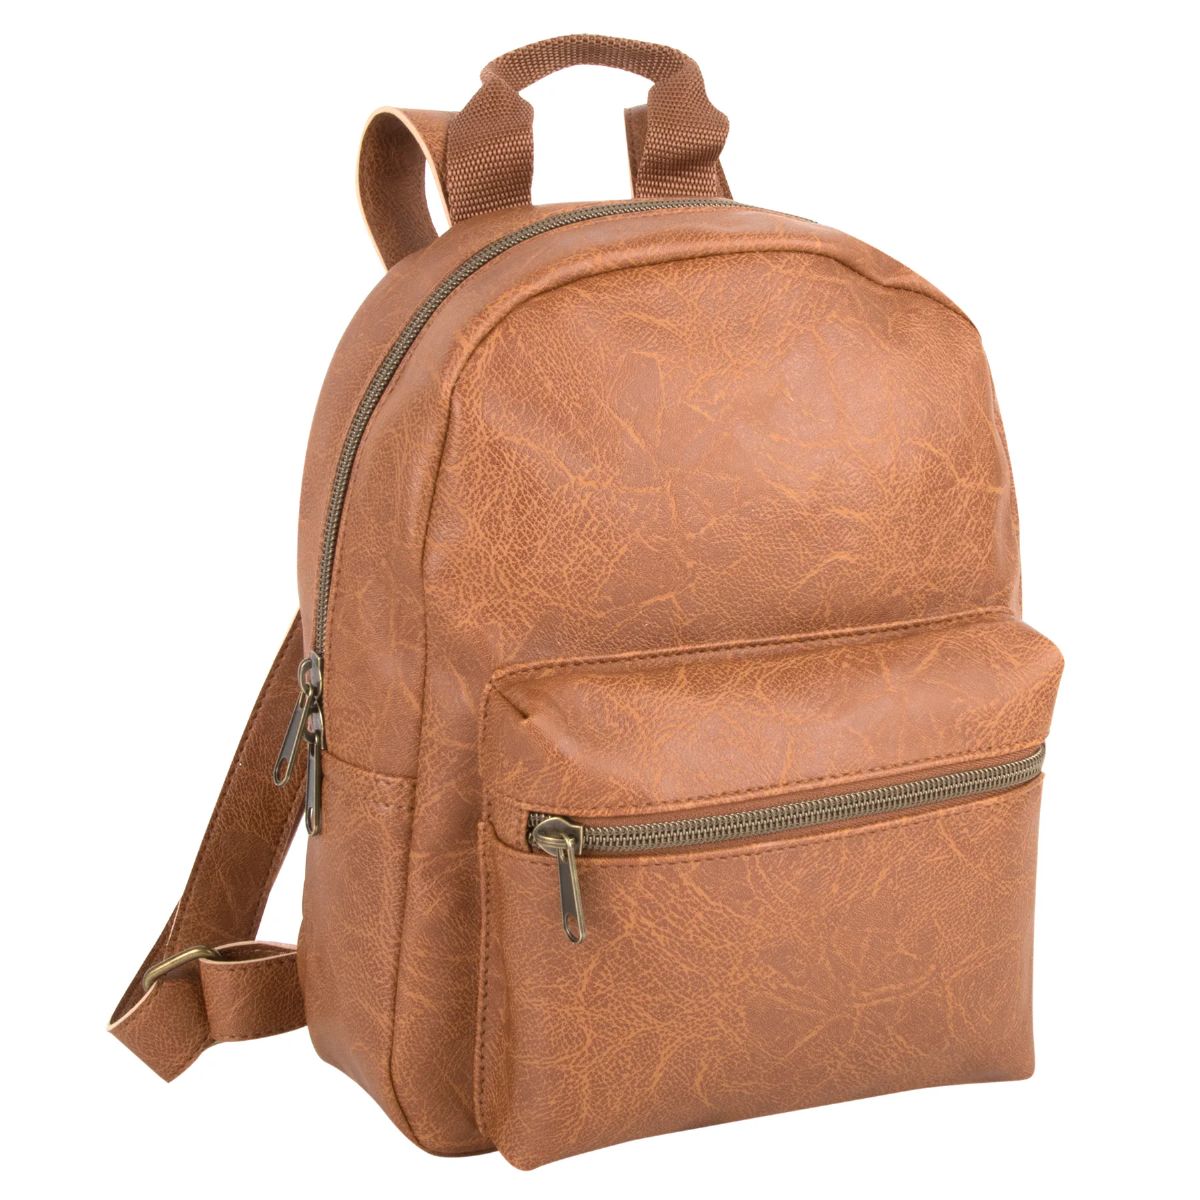 24 Pieces of Mini 10 Inch Vinyl Backpack - Brown